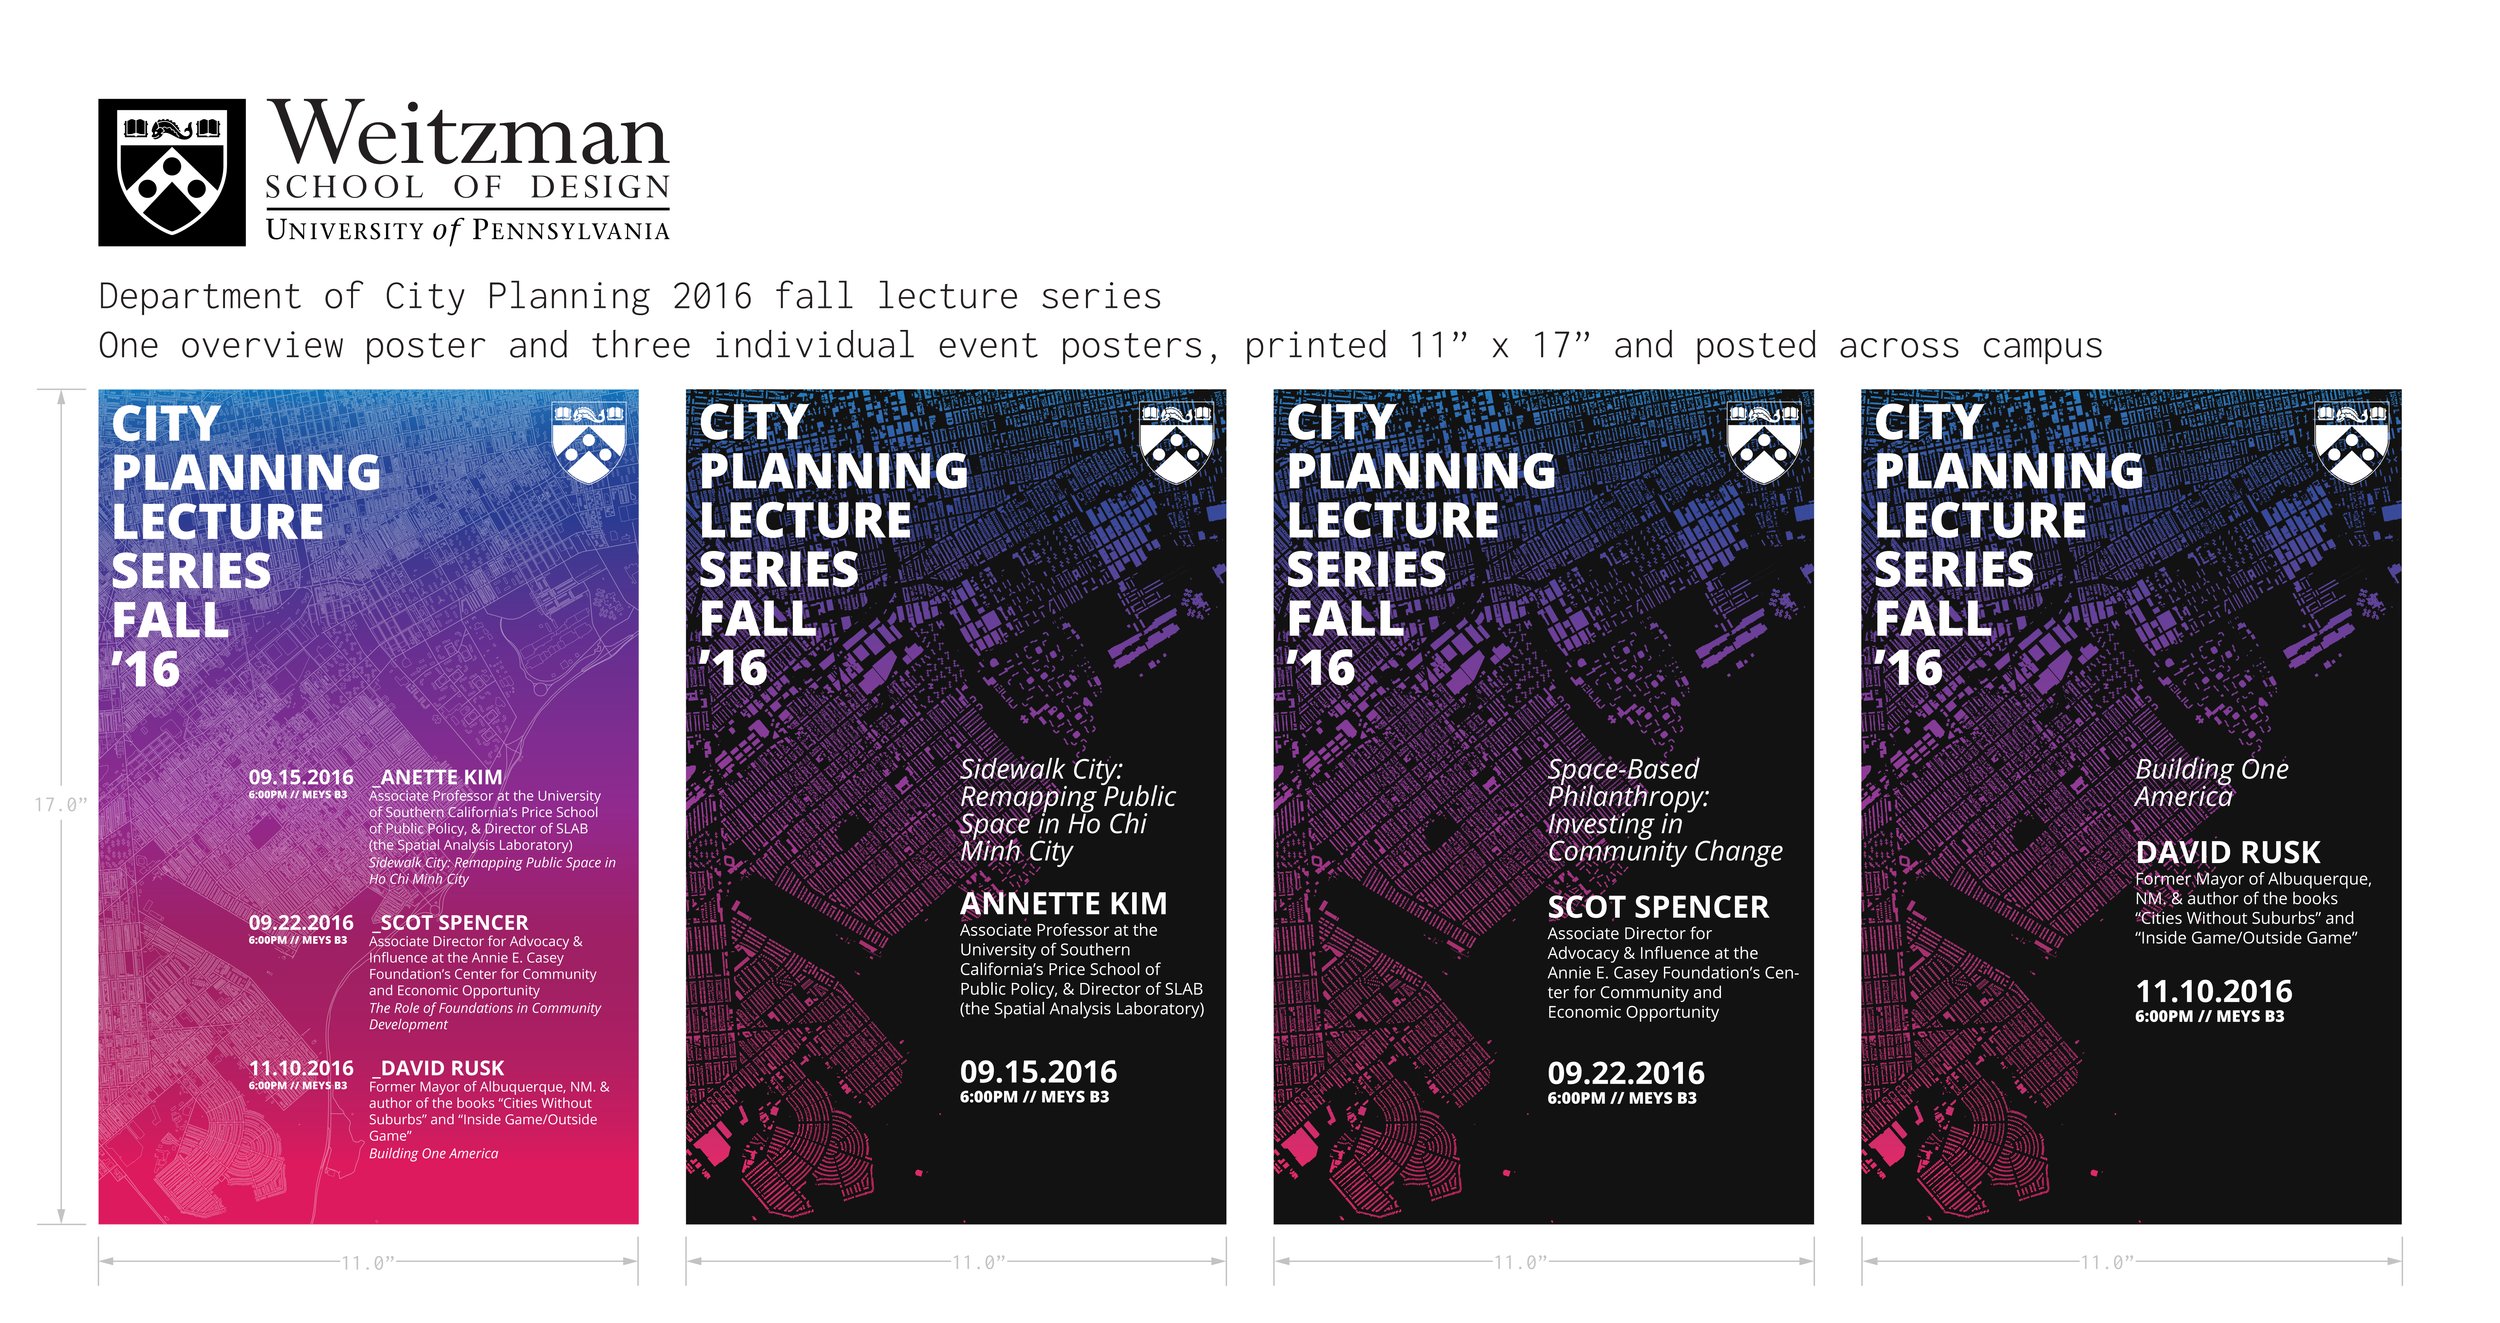 Poster Design for Penn Weitzman's Fall 2016 Lecture Series